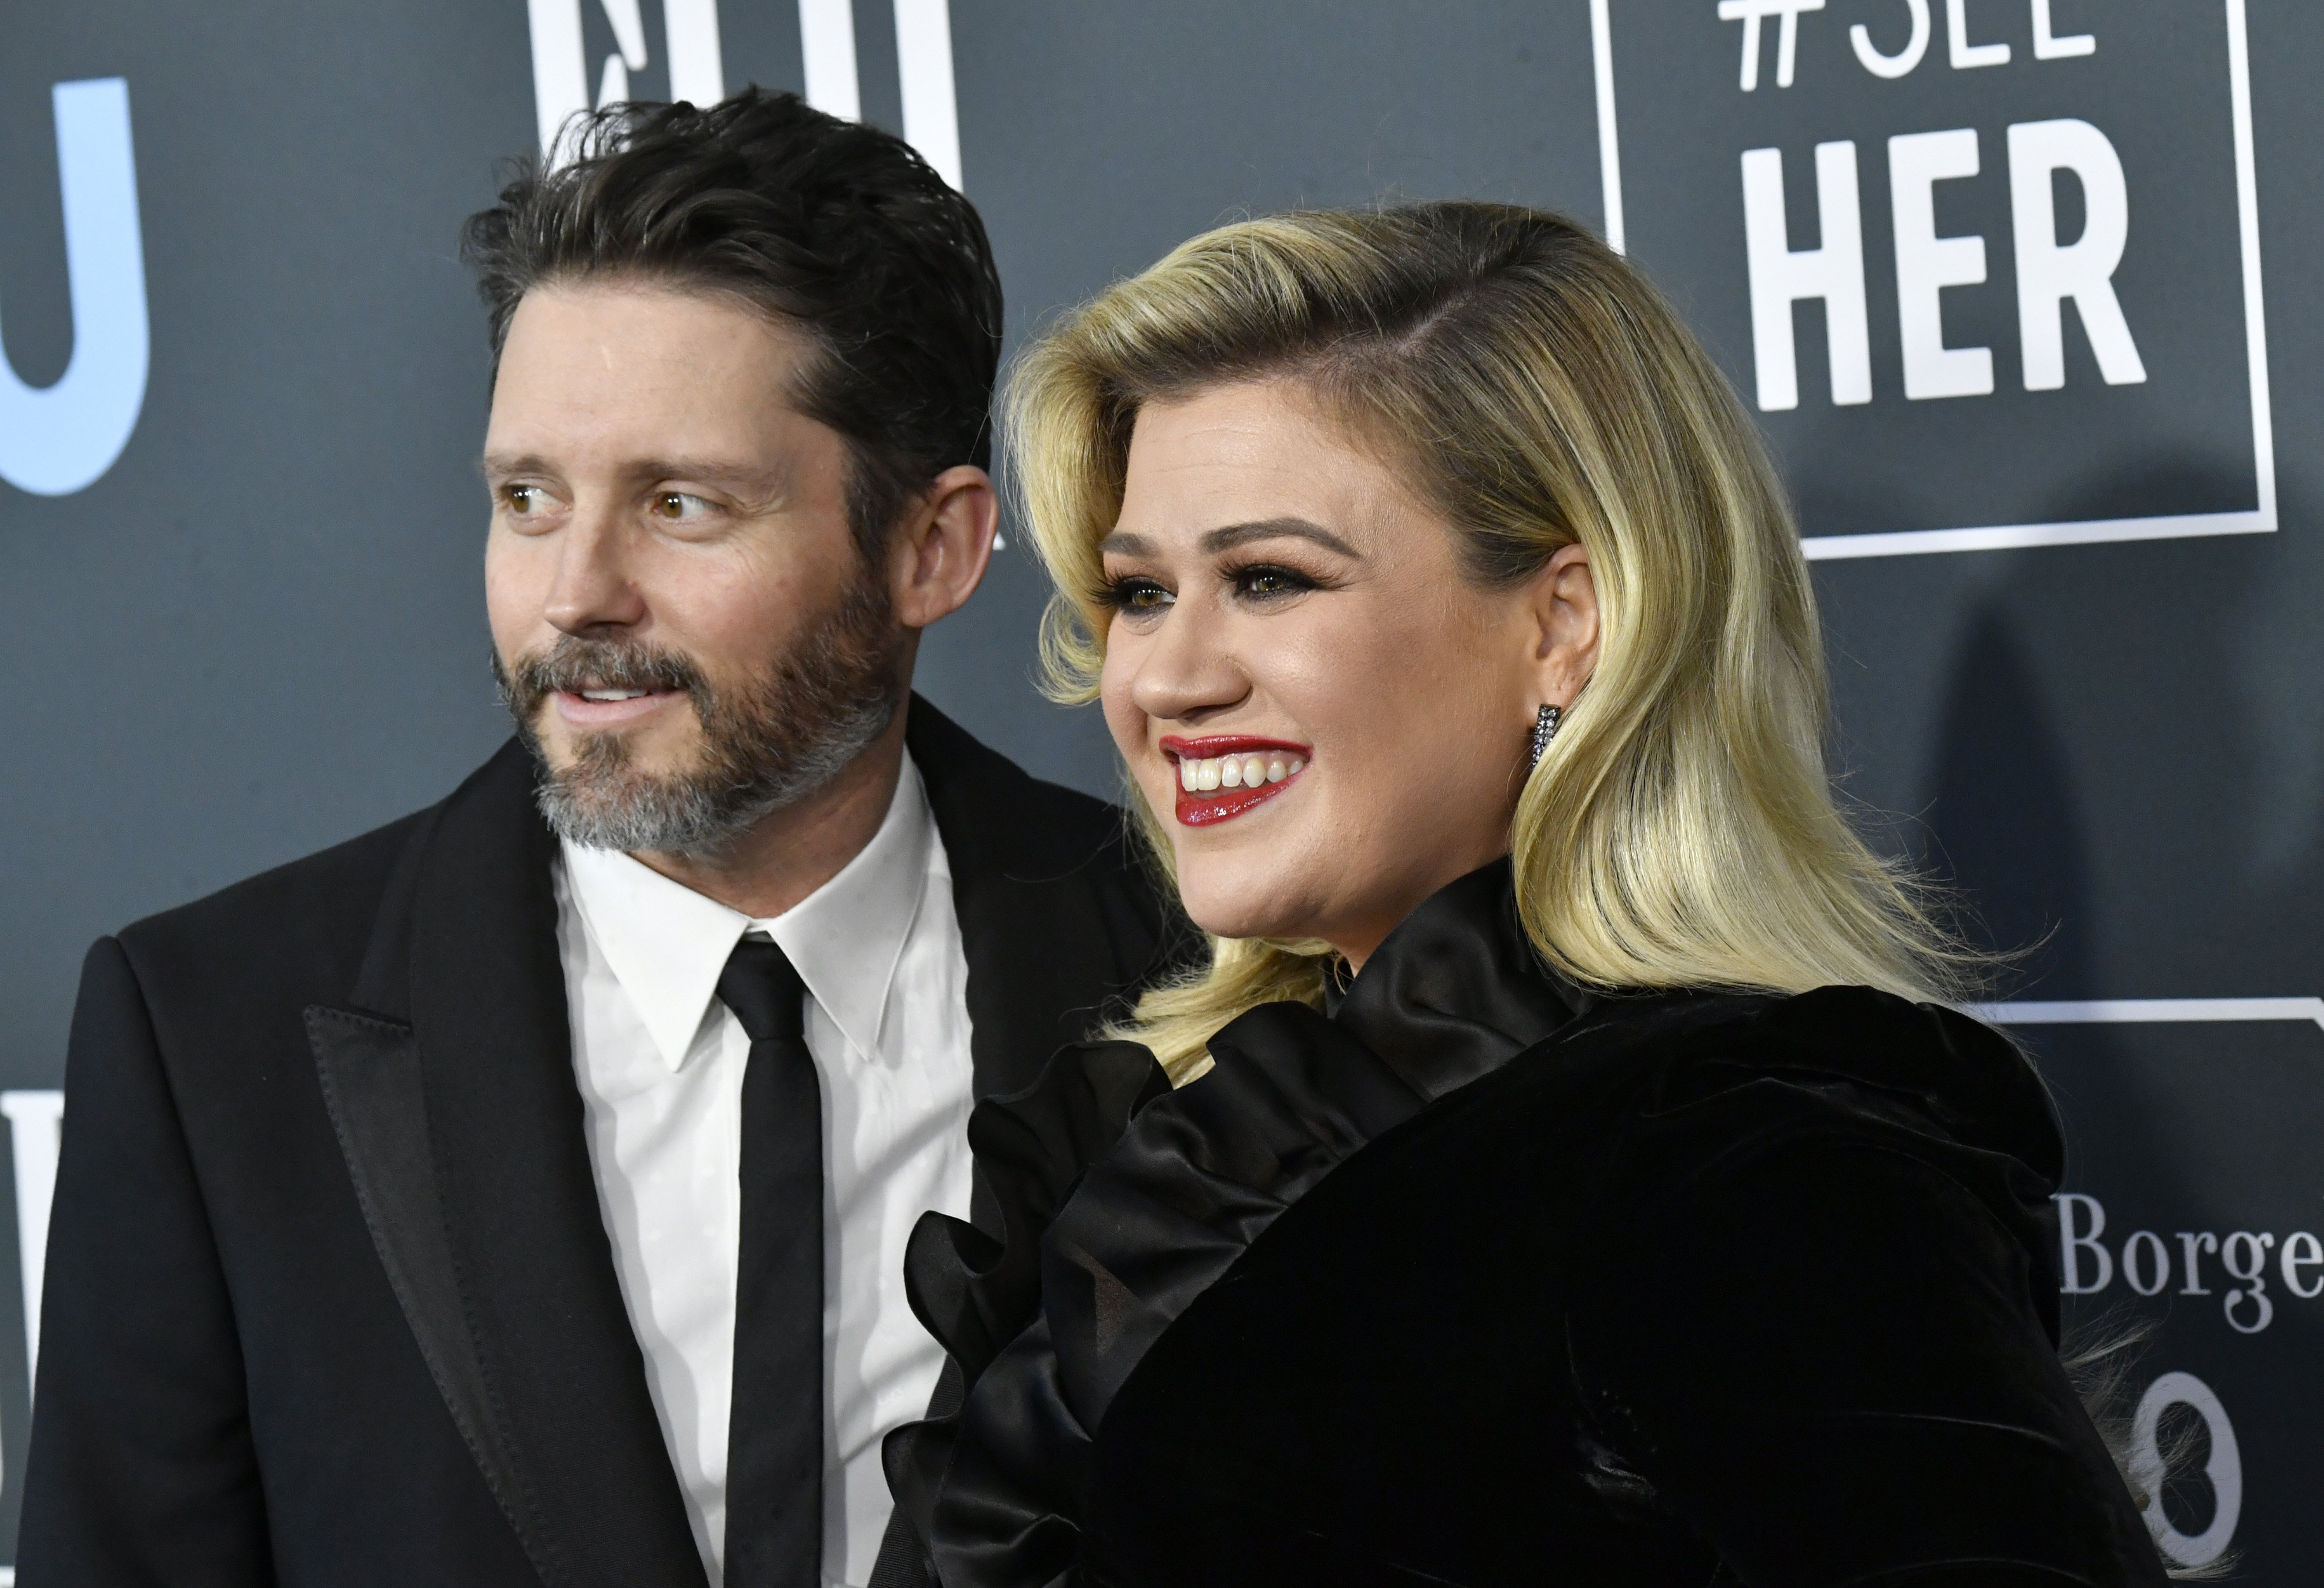 Brandon Blackstock and Kelly Clarkson attend the 25th Annual Critics' Choice Awards on January 12, 2020 | Photo: Getty Images